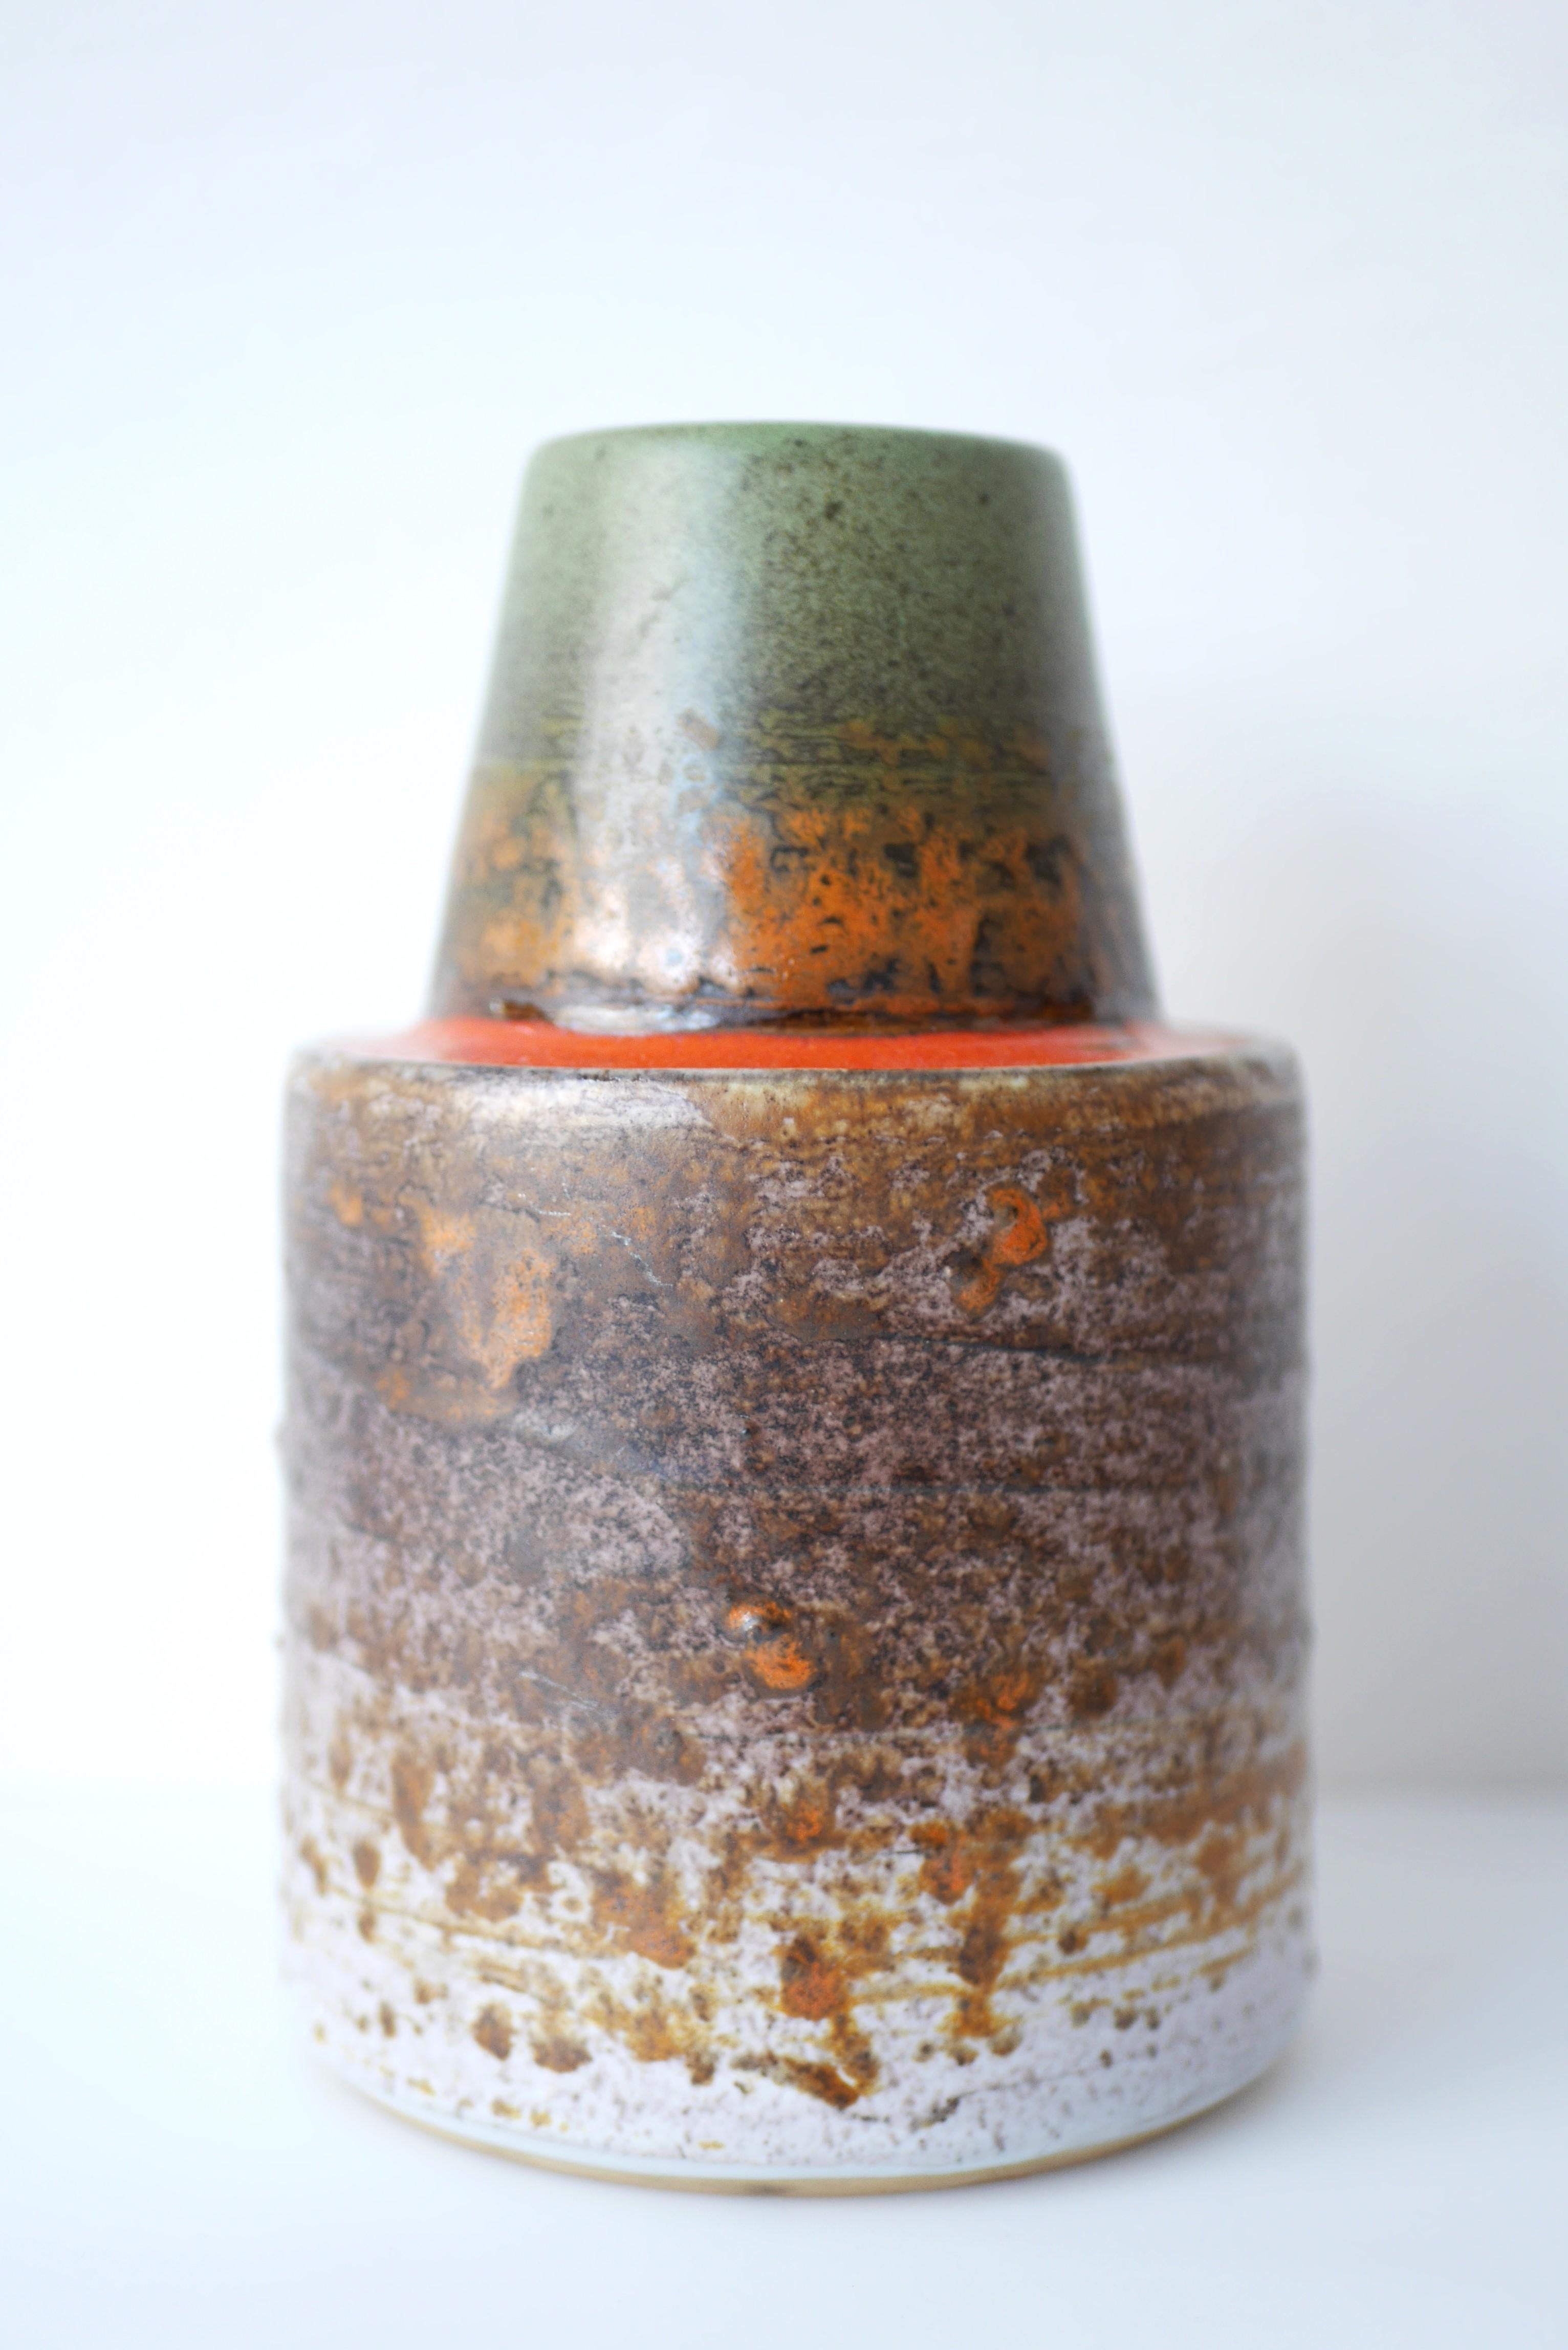 An extraordinary vintage art ceramic vase from Tilgmans, Sweden. This vase is out of the ordinary the shape is voluptuous still simple, this in combination of a fantastic glazing makes this object really to stand out. The glazing is a sign of true